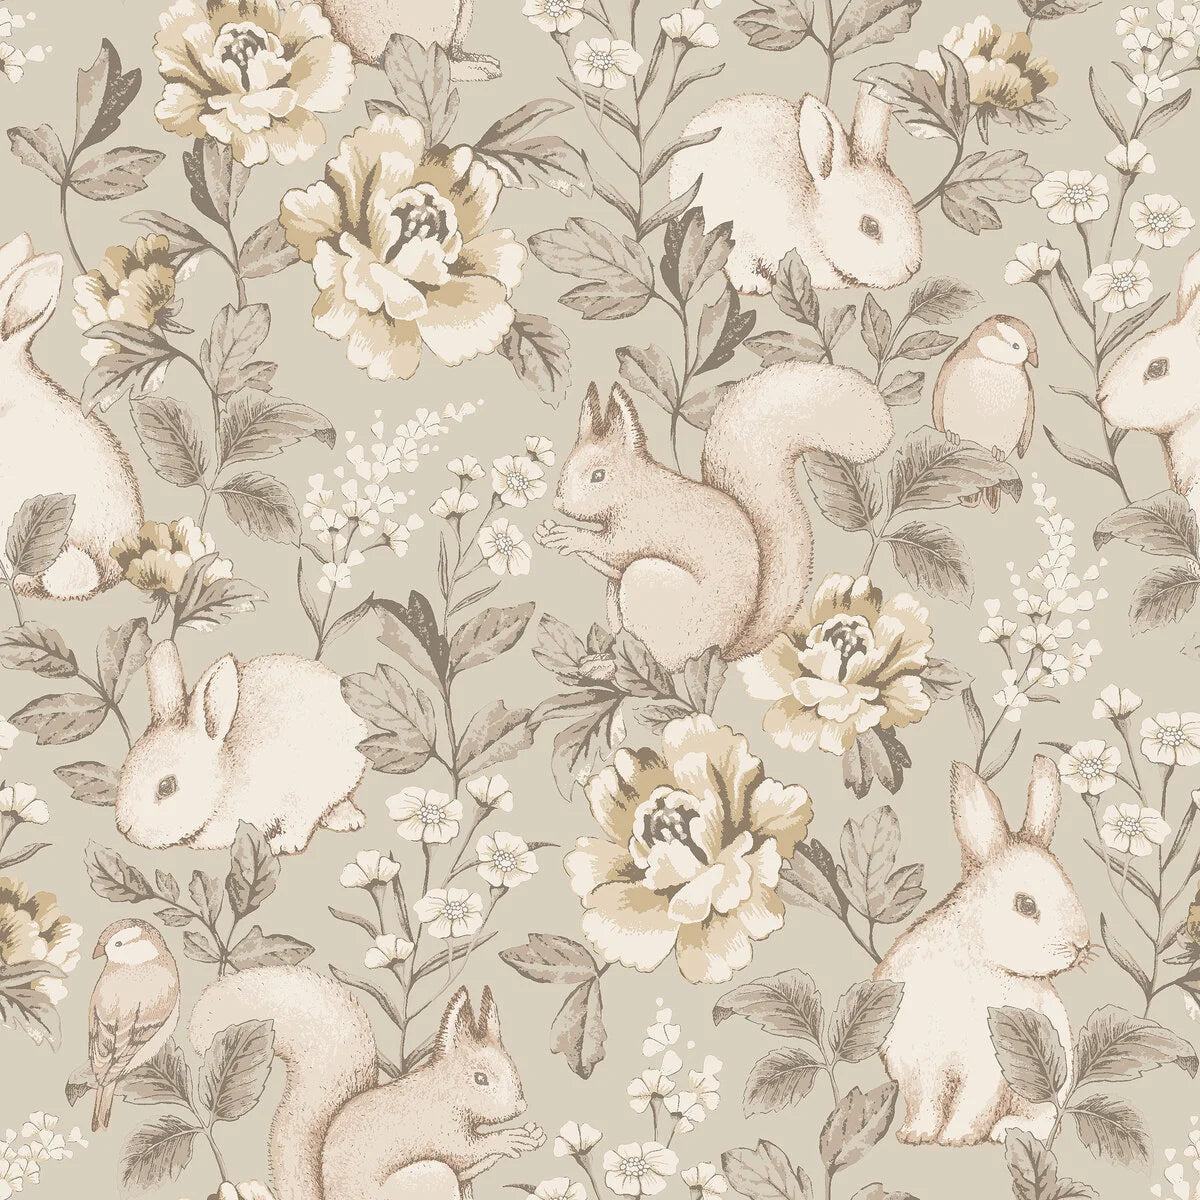 Our Magic Forest children’s wallpaper in soft natural tones of beige and linen, exudes a calm and soothing character.